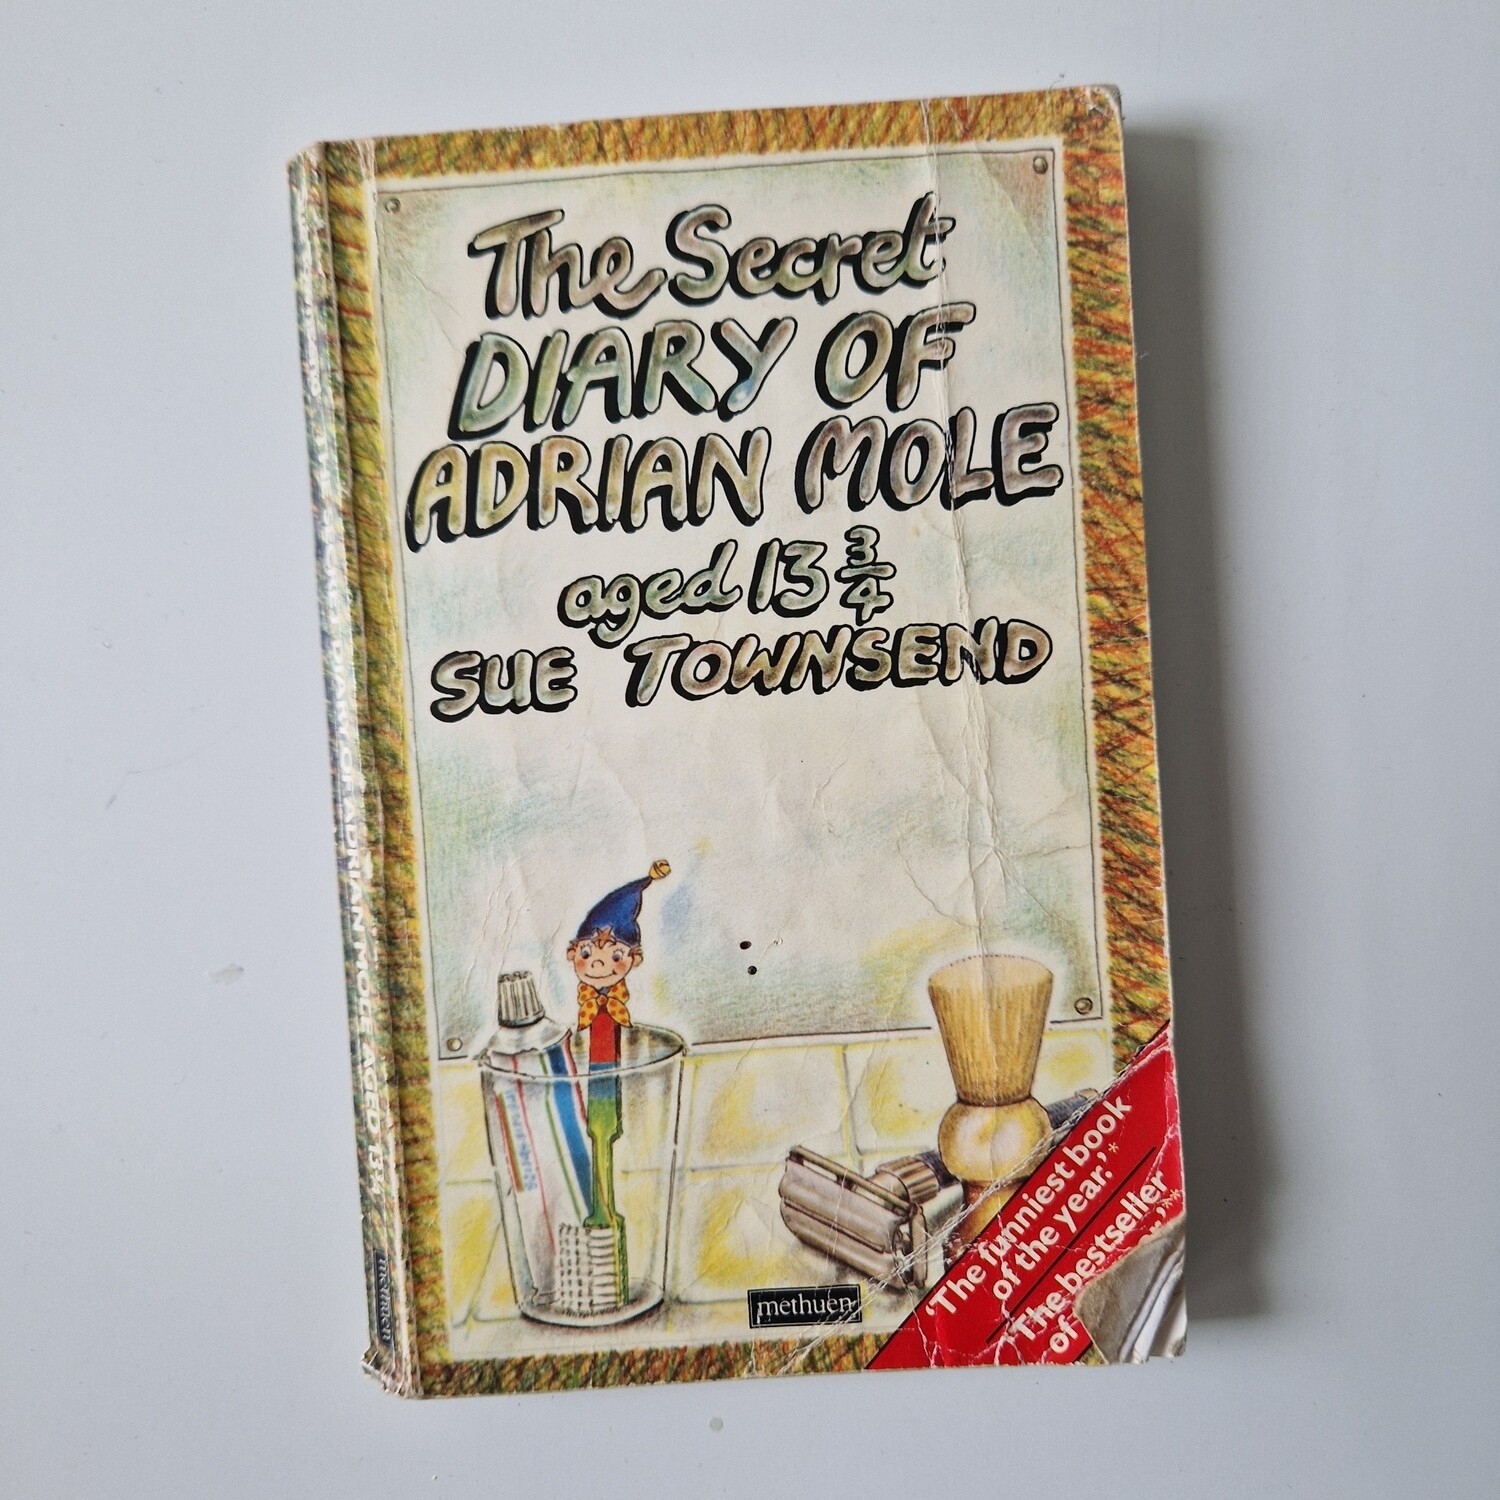 The Secret Diary of Adrian Mole aged 13 3/4 Notebook - made from a paperback book